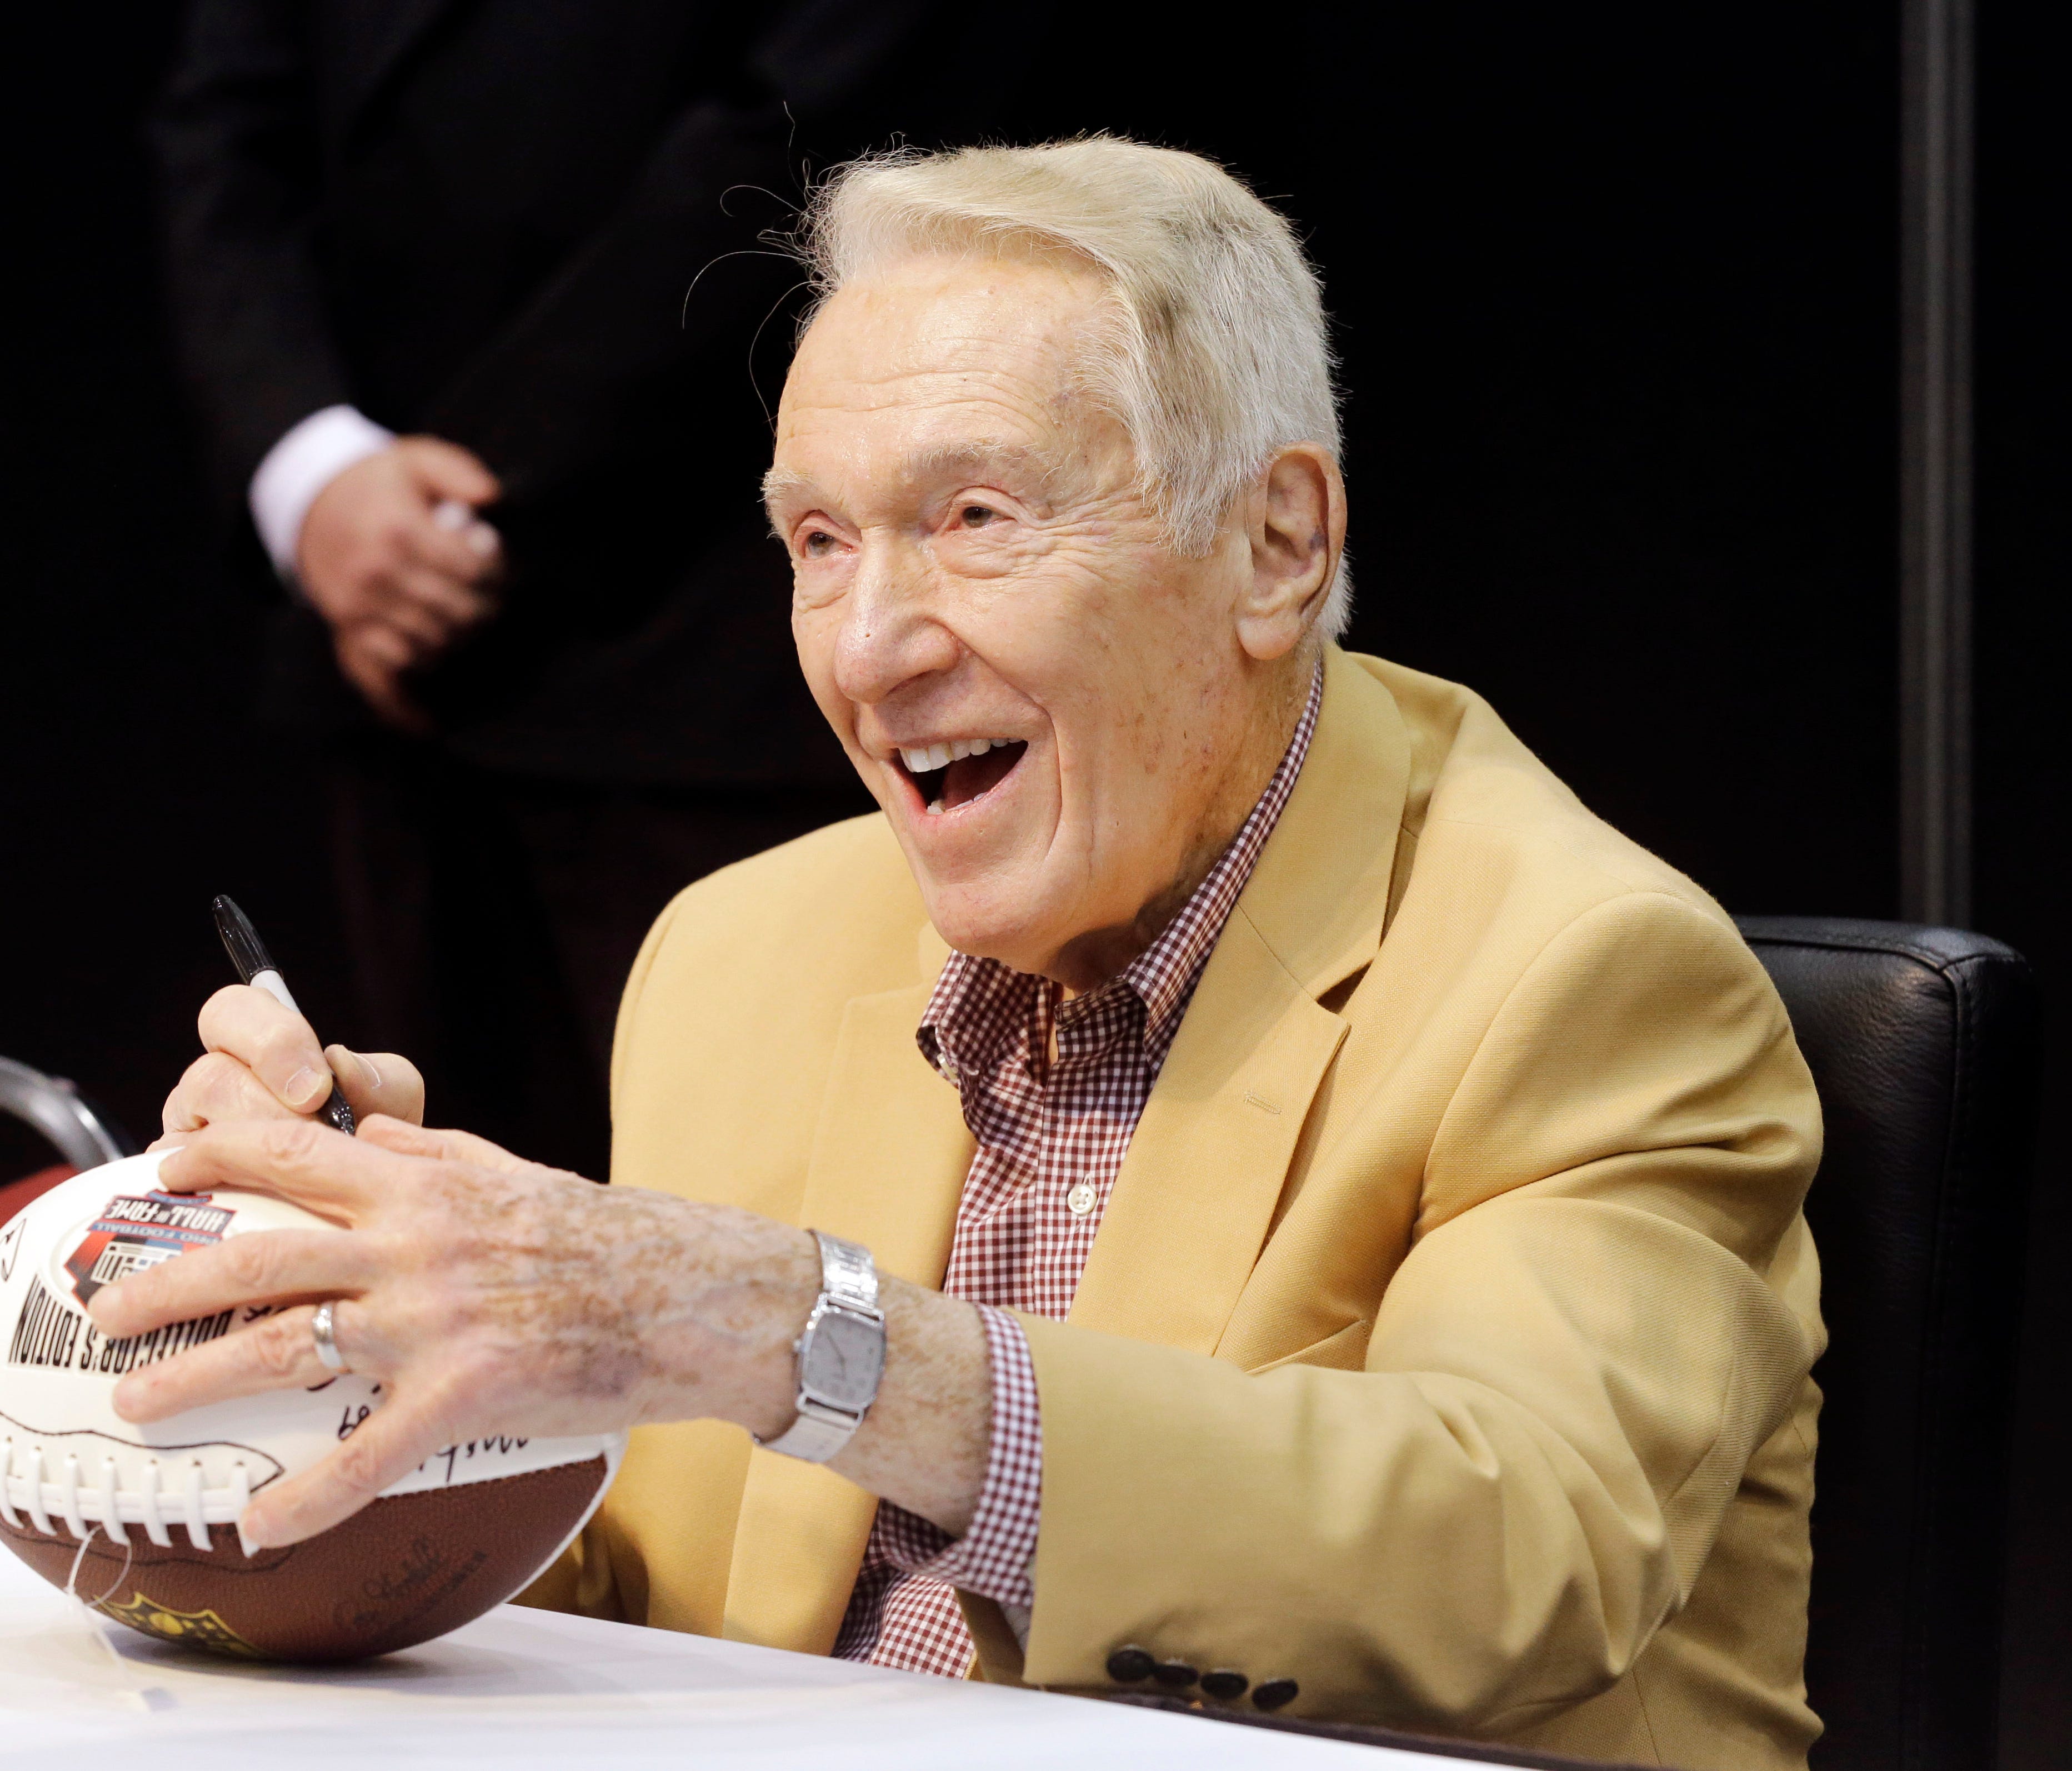 Hall of Fame coach Marv Levy says he has heard positive things about Jon Gruden but wonders how the contract would look if the Raiders have losing seasons.